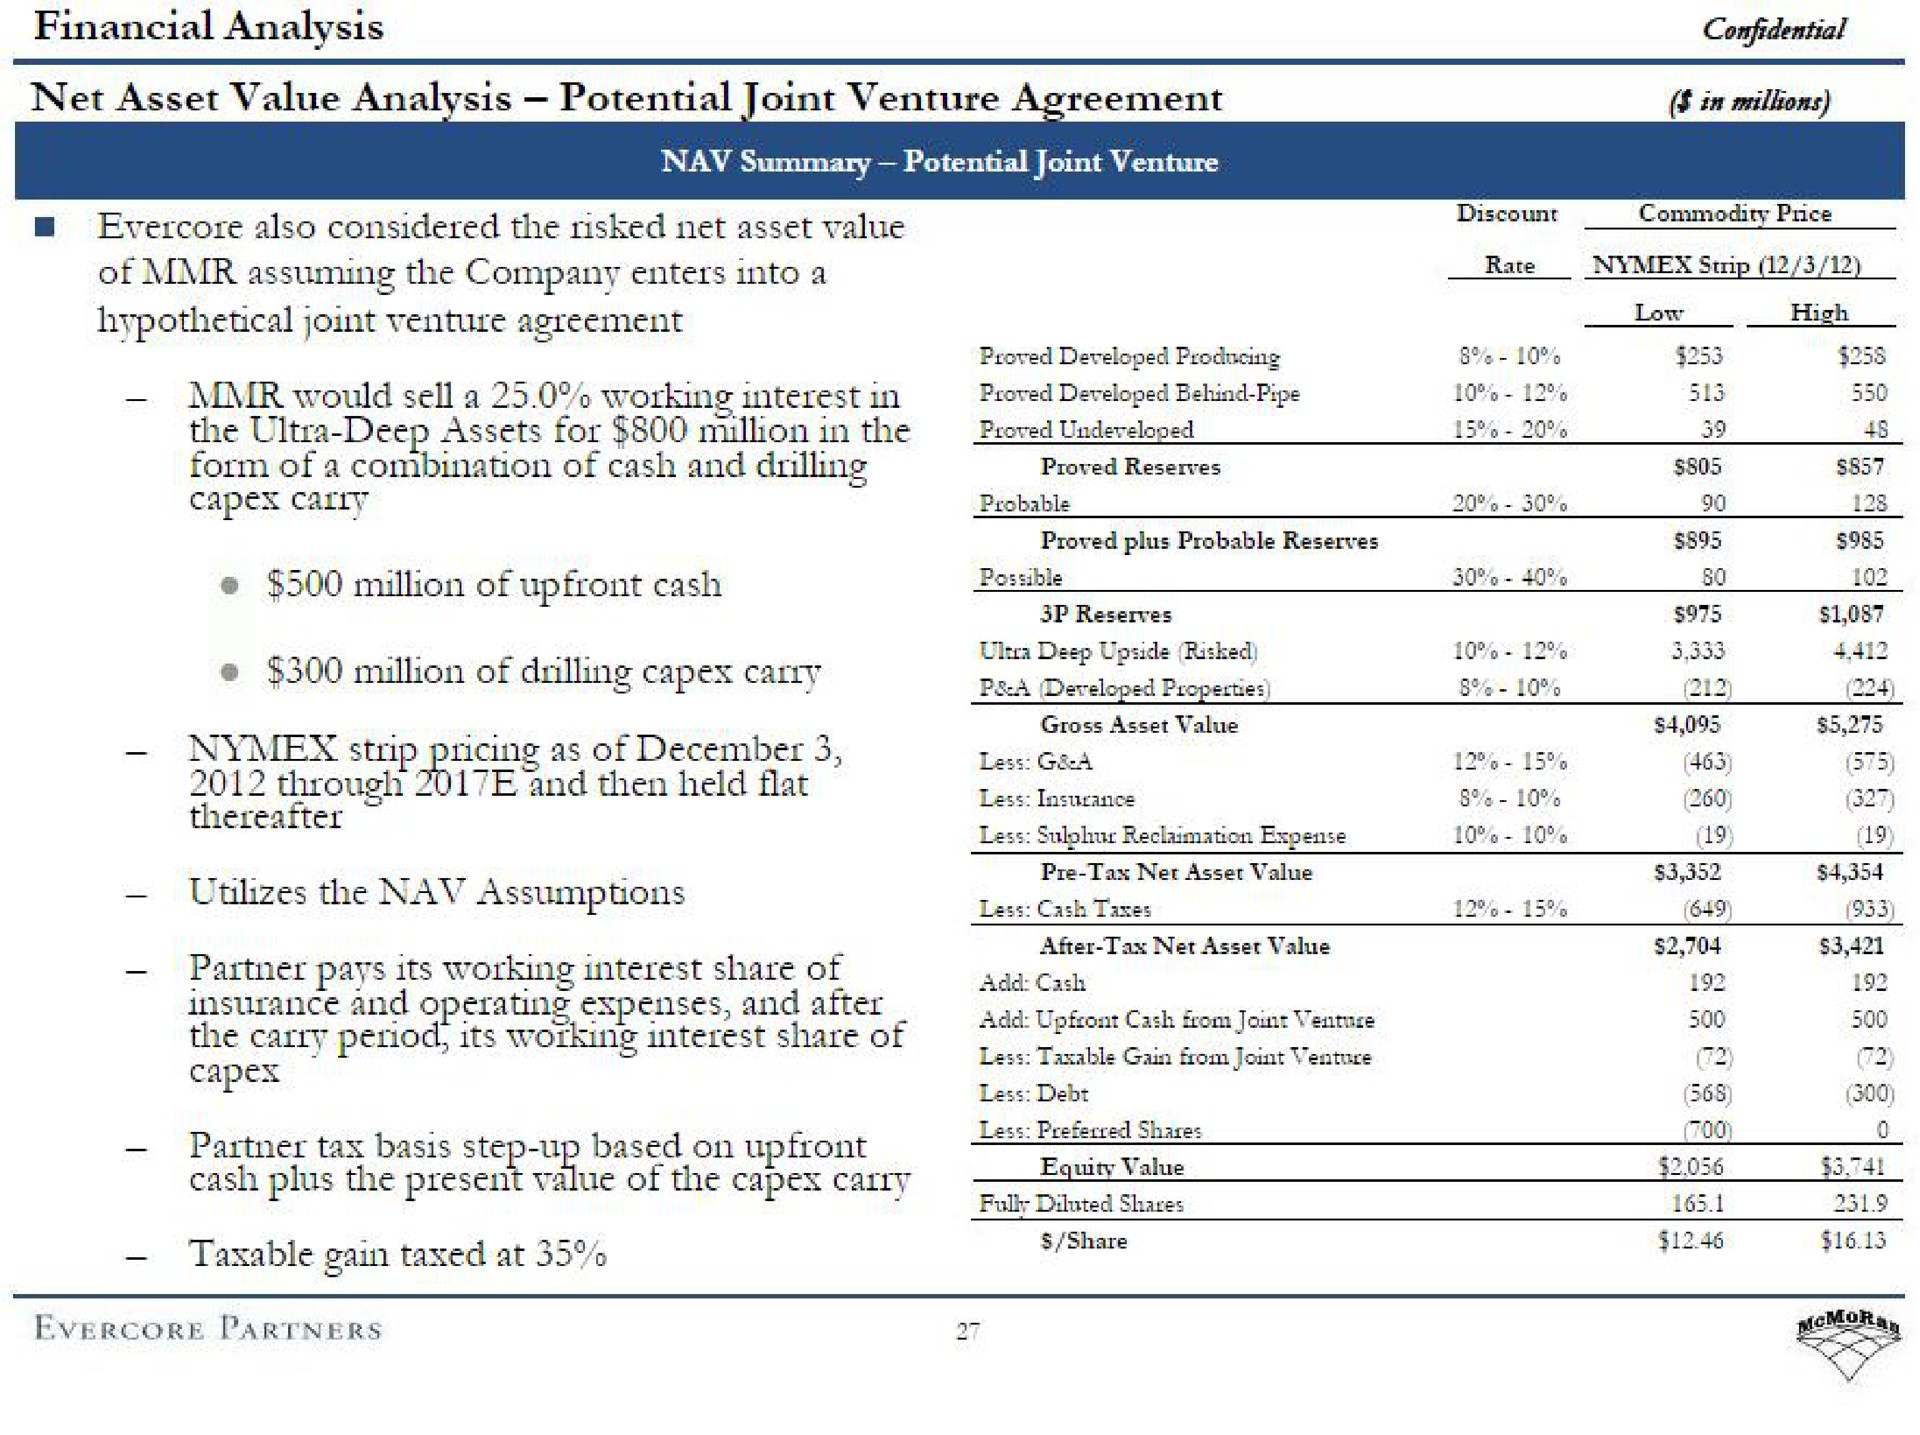 financial analysis confidential wet asset value analysis potential joint venture agreement also considered the risked net asset value of assuming the company enters into a hypothetical joint venture agreement would sell a working interest in the ultra deep assets for million in the proved developed behind pipe proved undeveloped rate million of cash million of drilling strip pricing as of past disclosed lek the assumptions partner pays its working interest share of taxable gain taxed at cash ies dee | Evercore